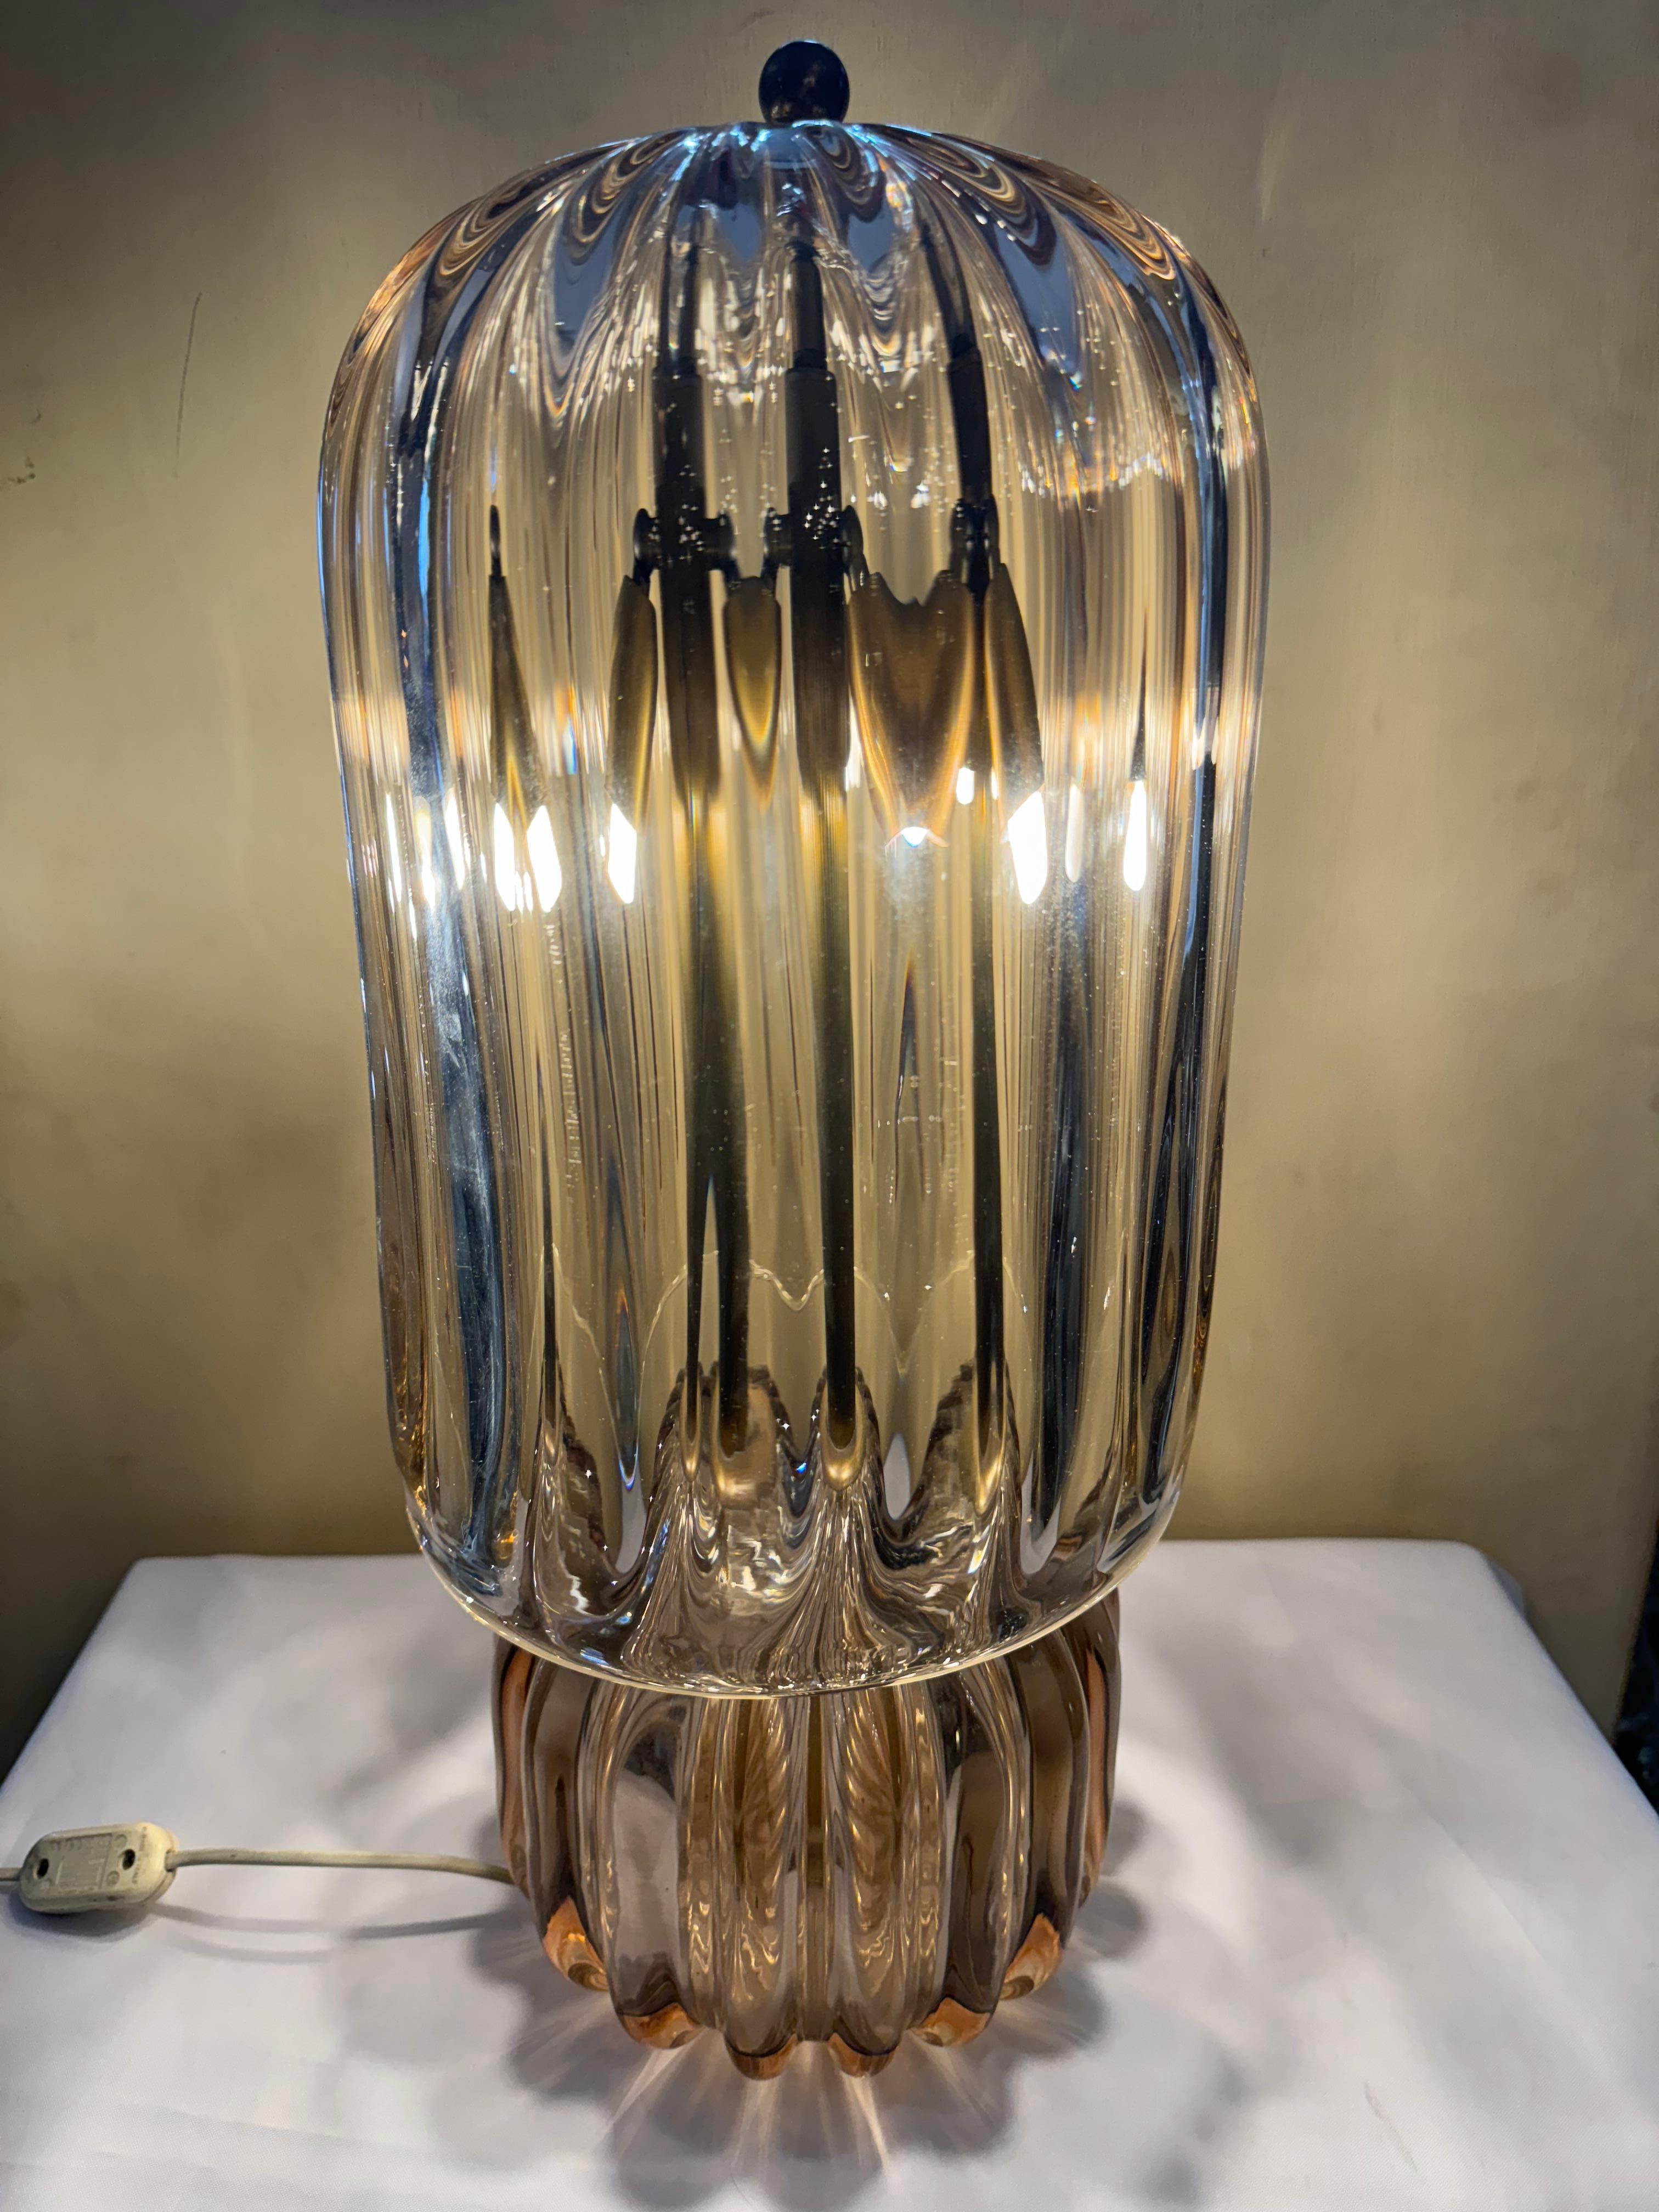 This exquisite mid-century modern glass lamp epitomizes the era's fascination with sleek, functional design and the innovative use of materials. Crafted from high-quality glass, its base boasts a stunning transparency that captures and refracts